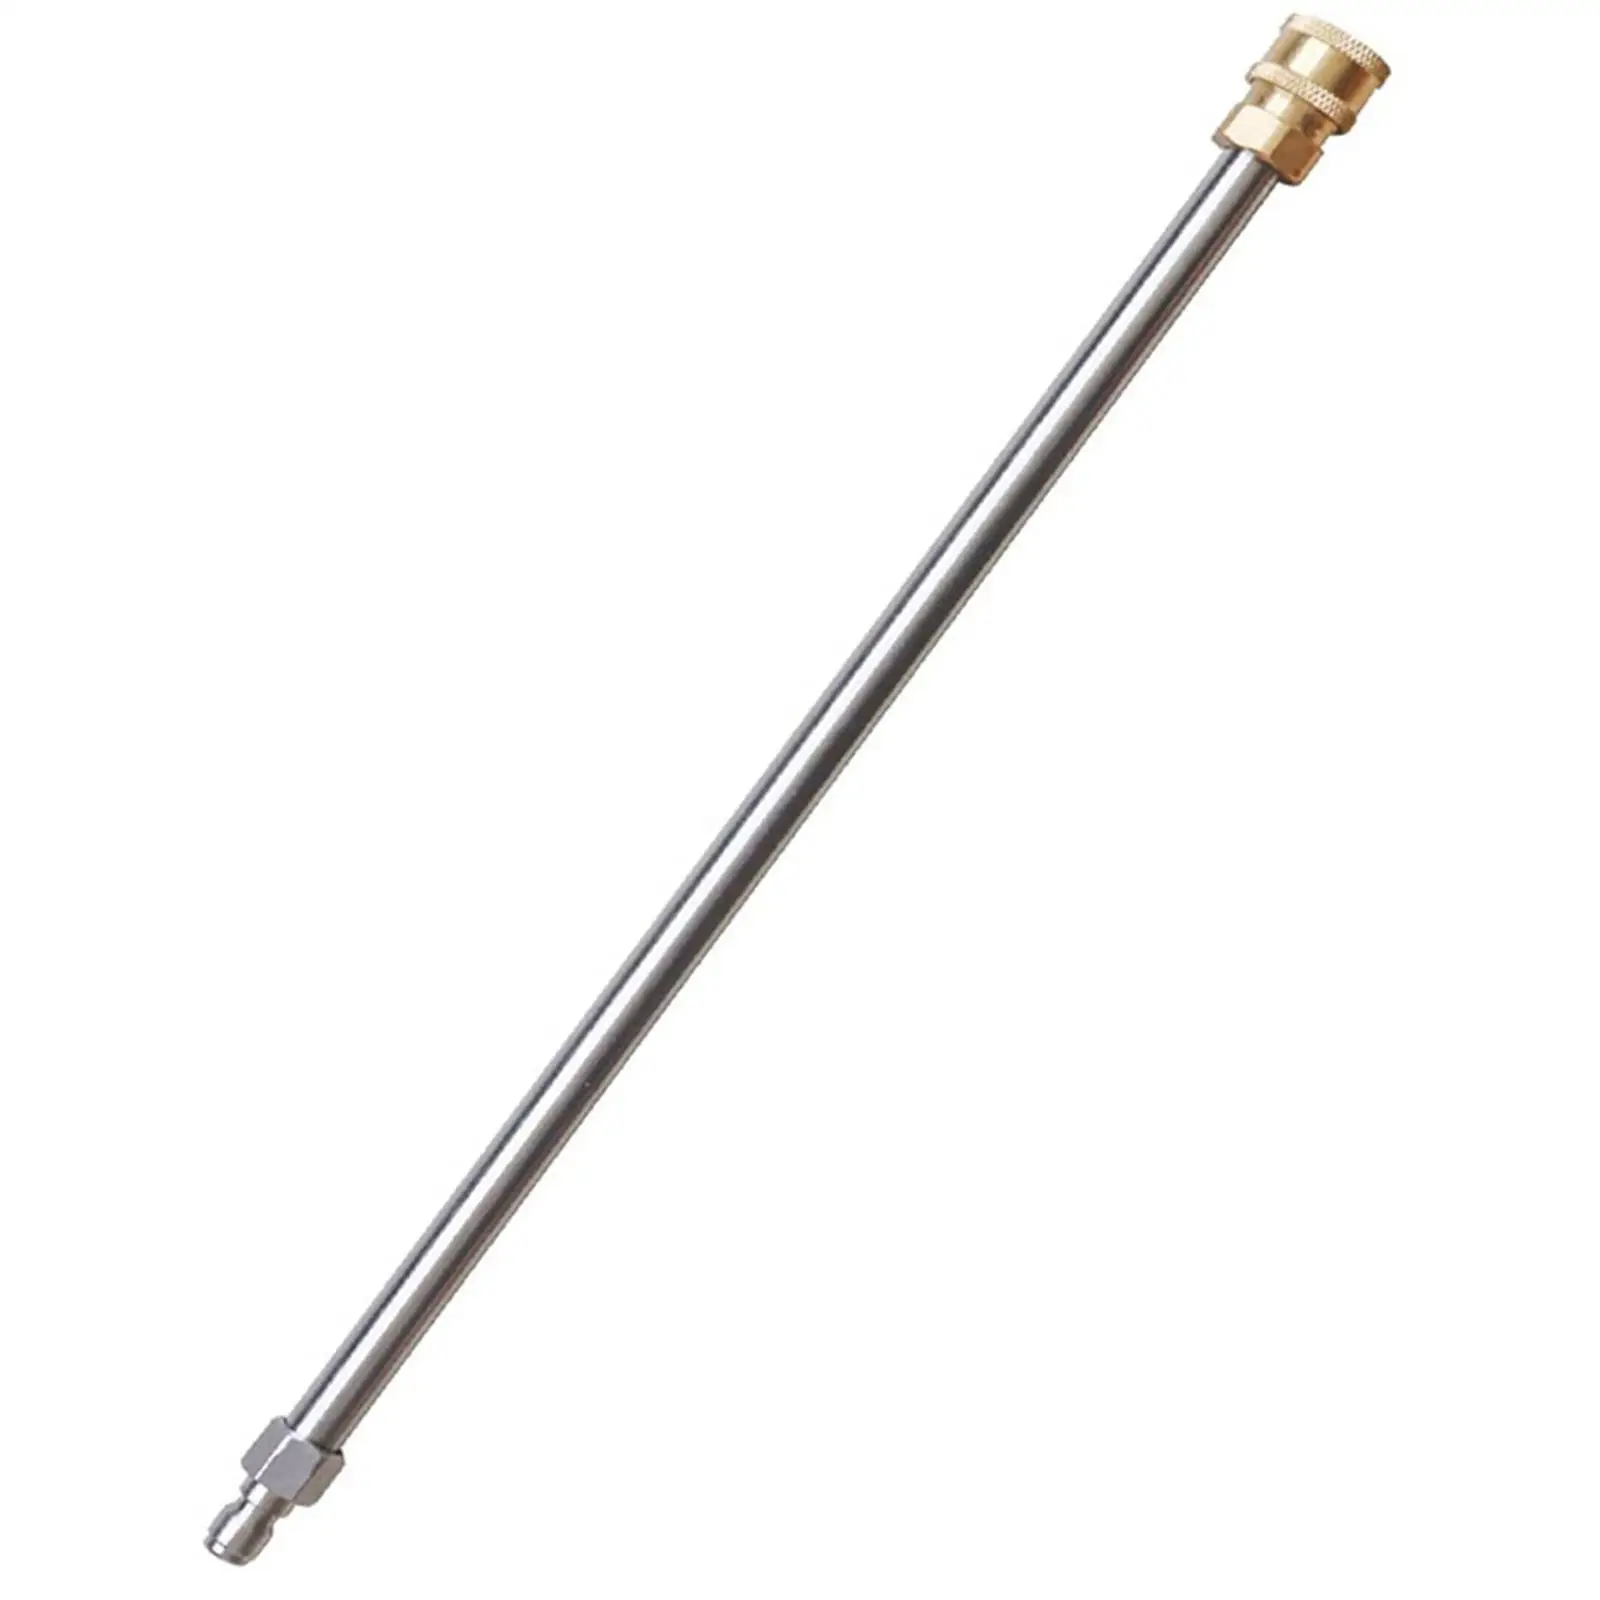 Pressure Washer Extension Wand, 17 Inch Stainless Steel 1/4 Inch Quick Connect Power Washer Lance